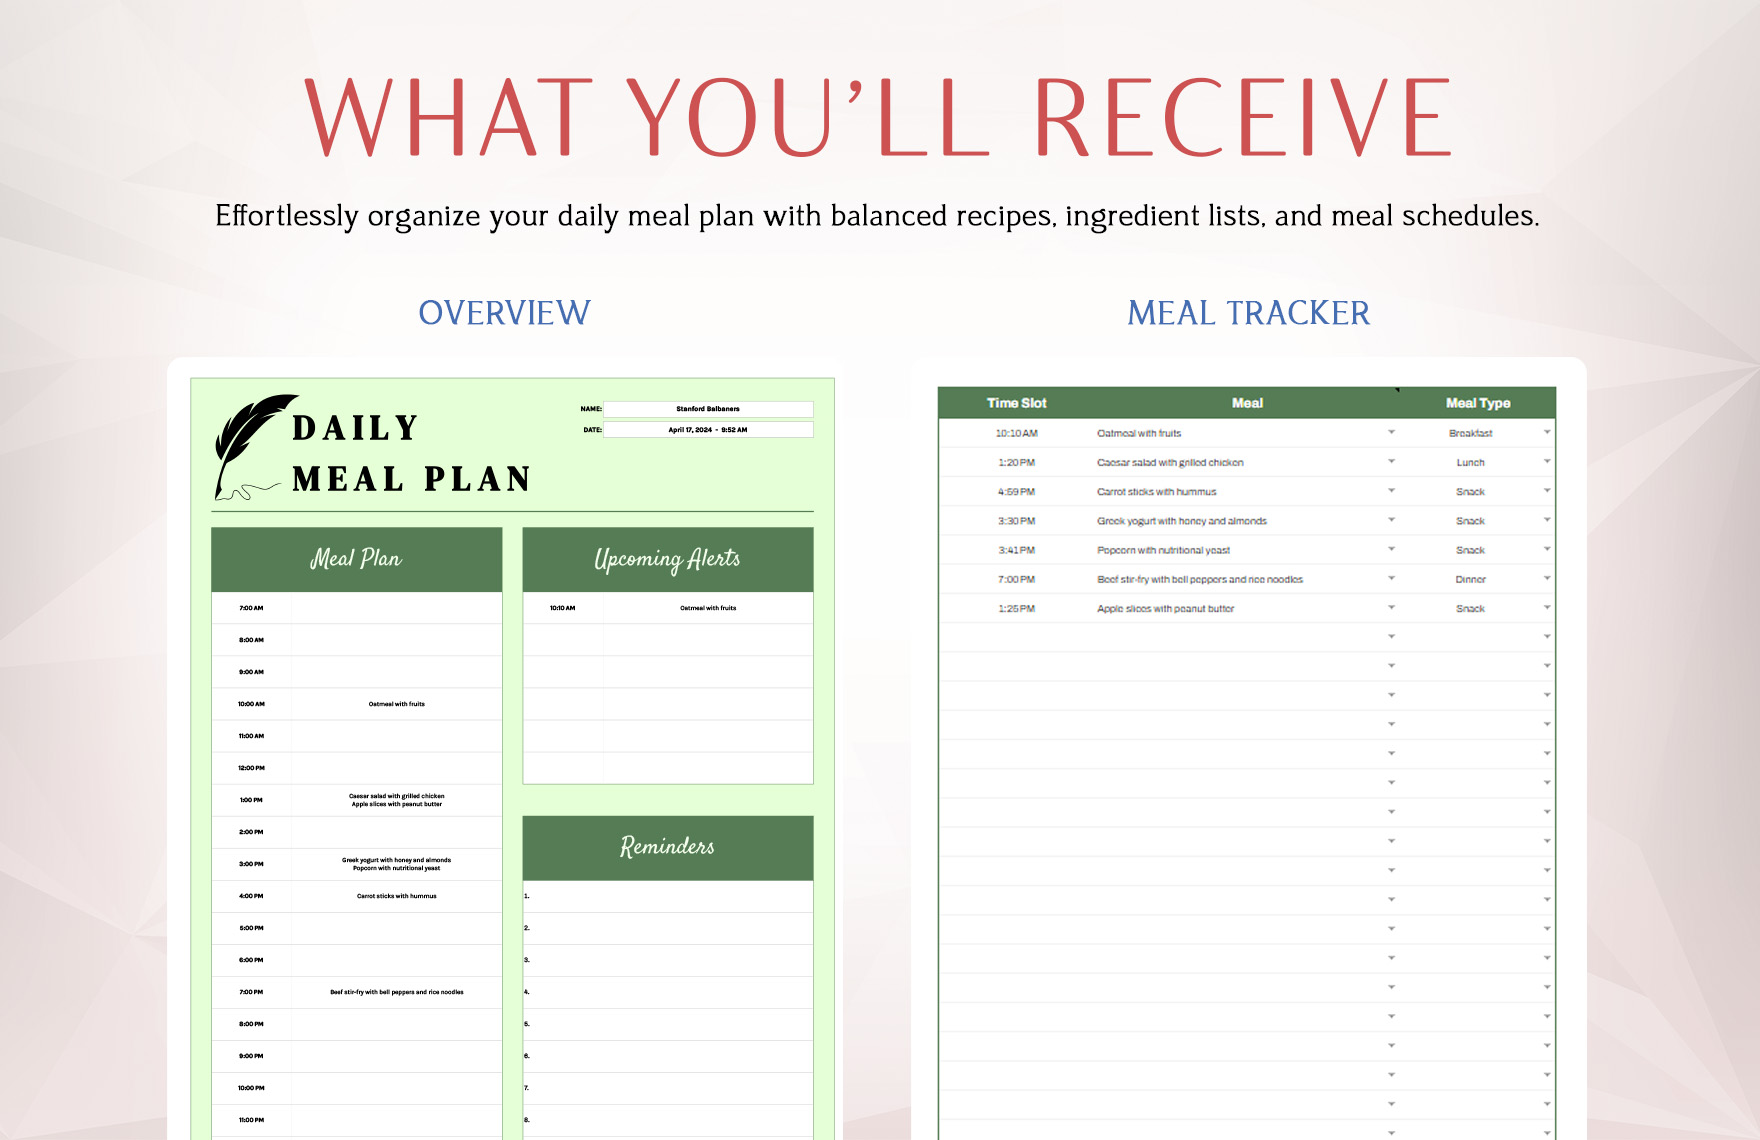 Daily Meal Plan Template